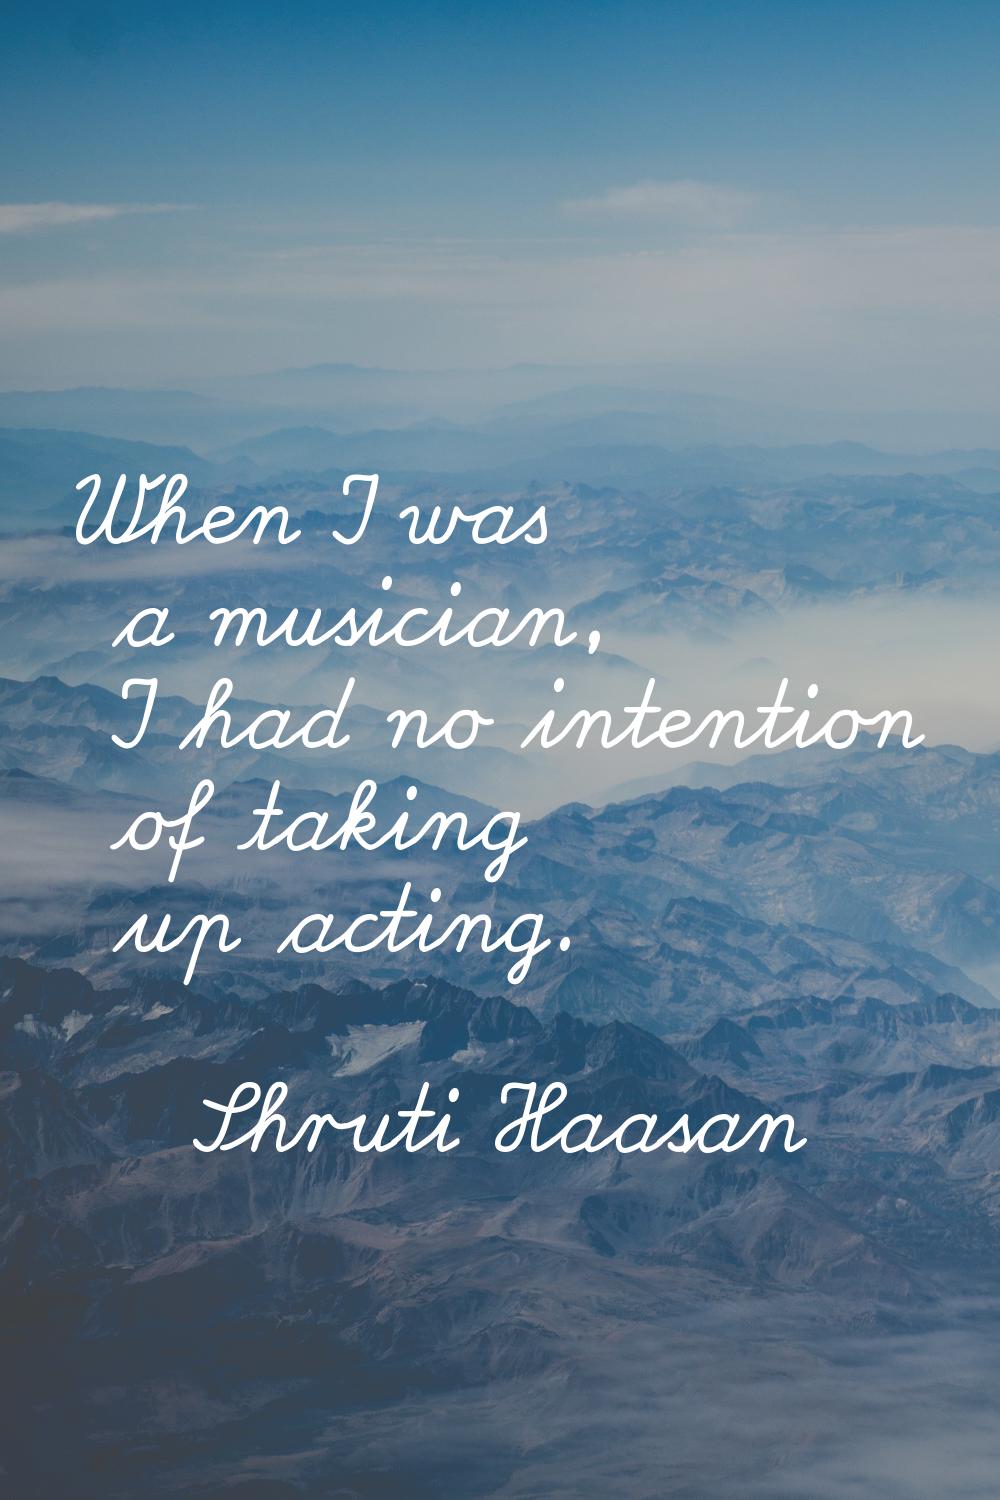 When I was a musician, I had no intention of taking up acting.